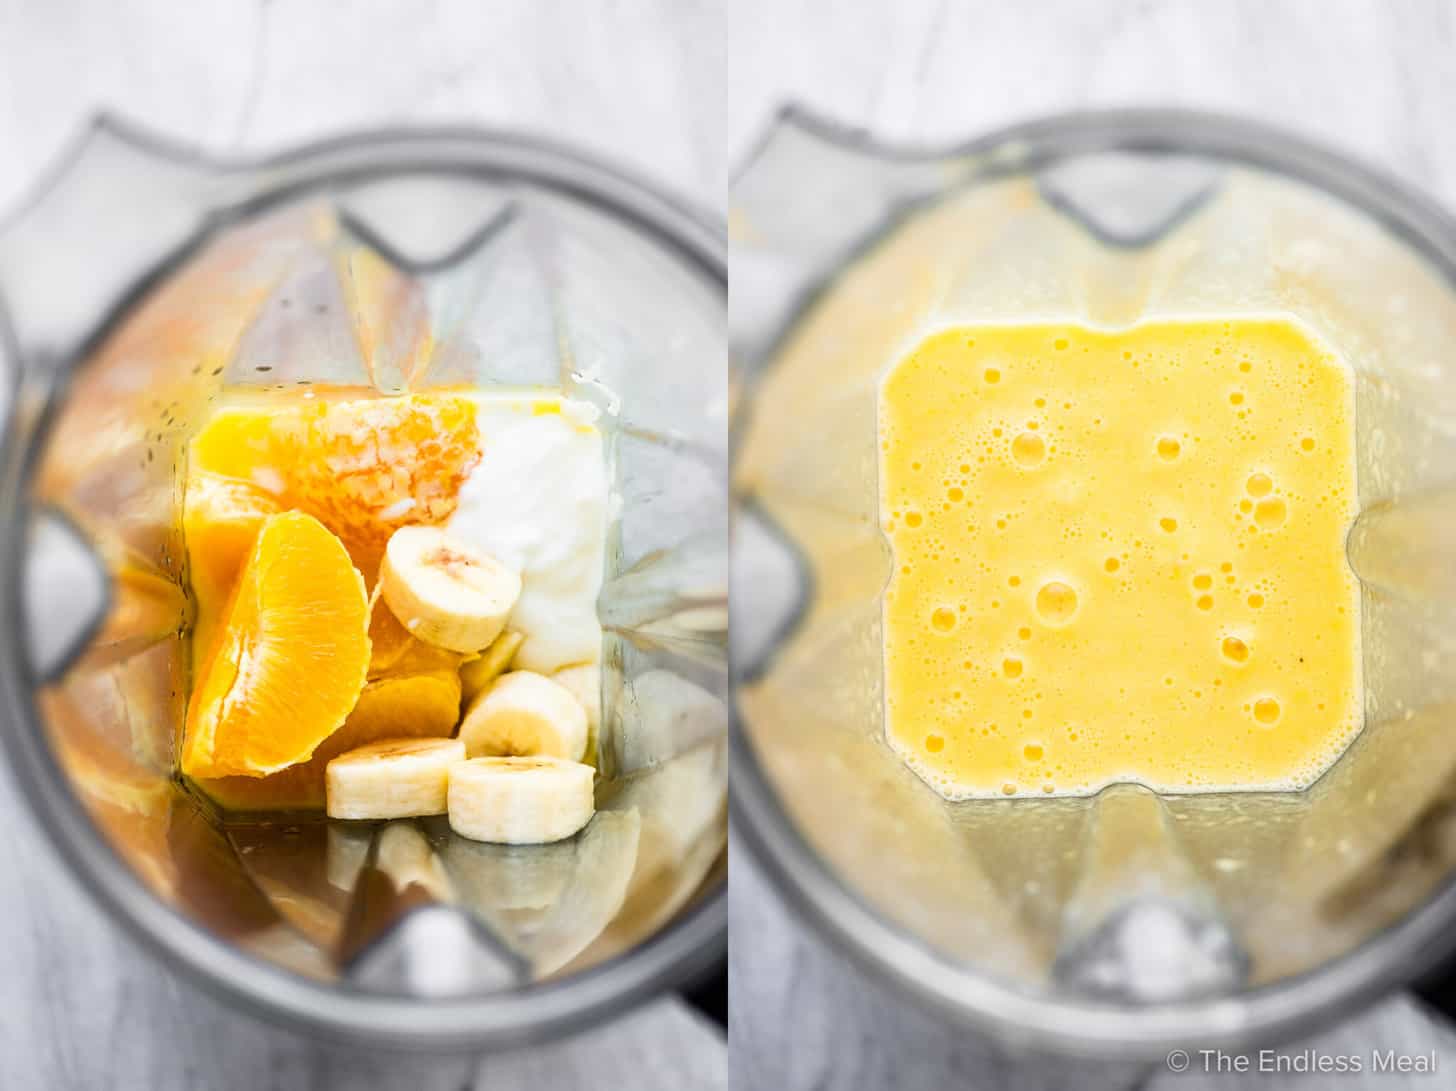 Before and after photos of the smoothie ingredients in a blender.